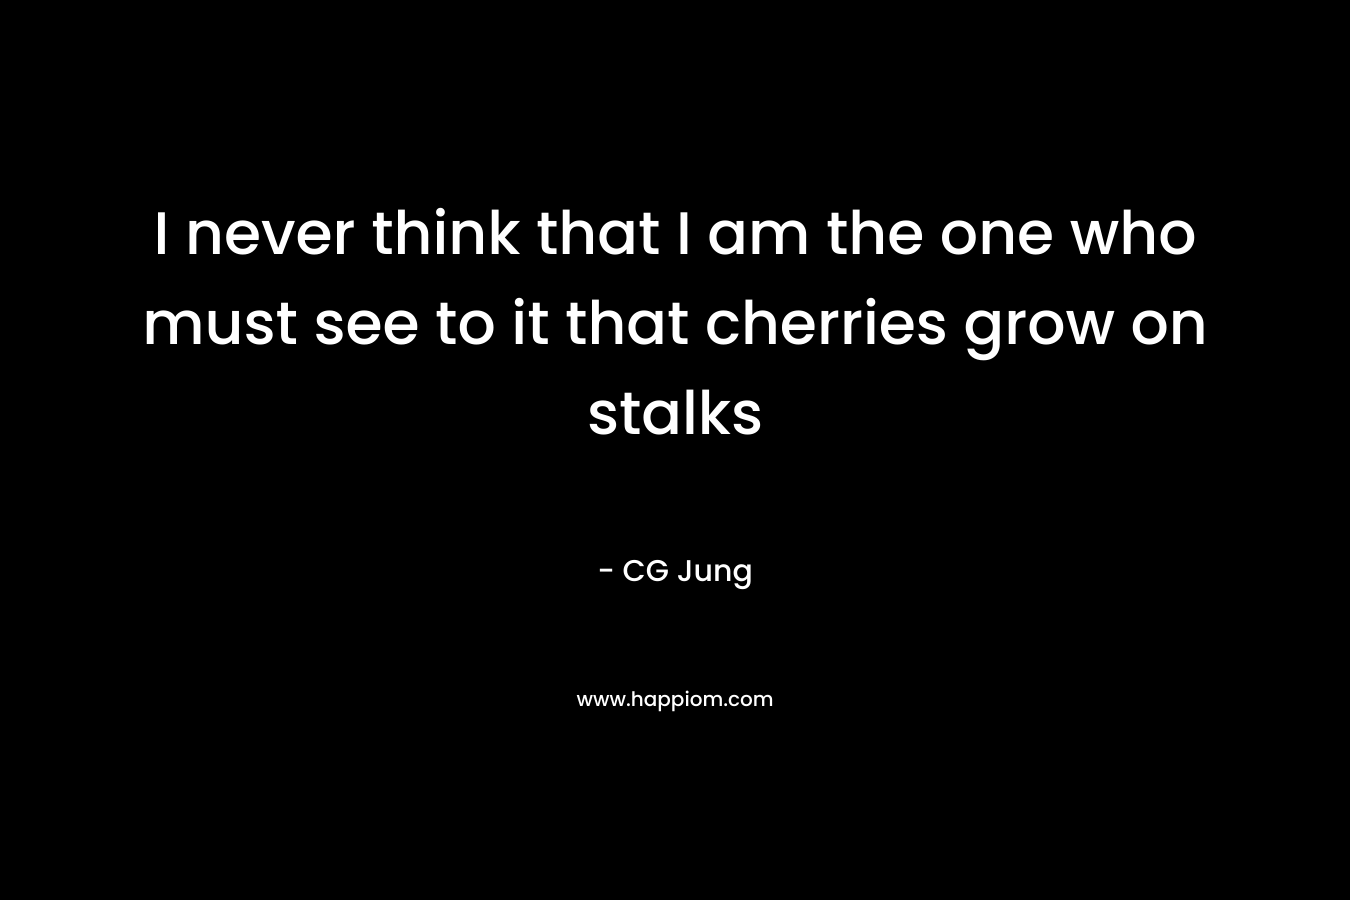 I never think that I am the one who must see to it that cherries grow on stalks – CG Jung